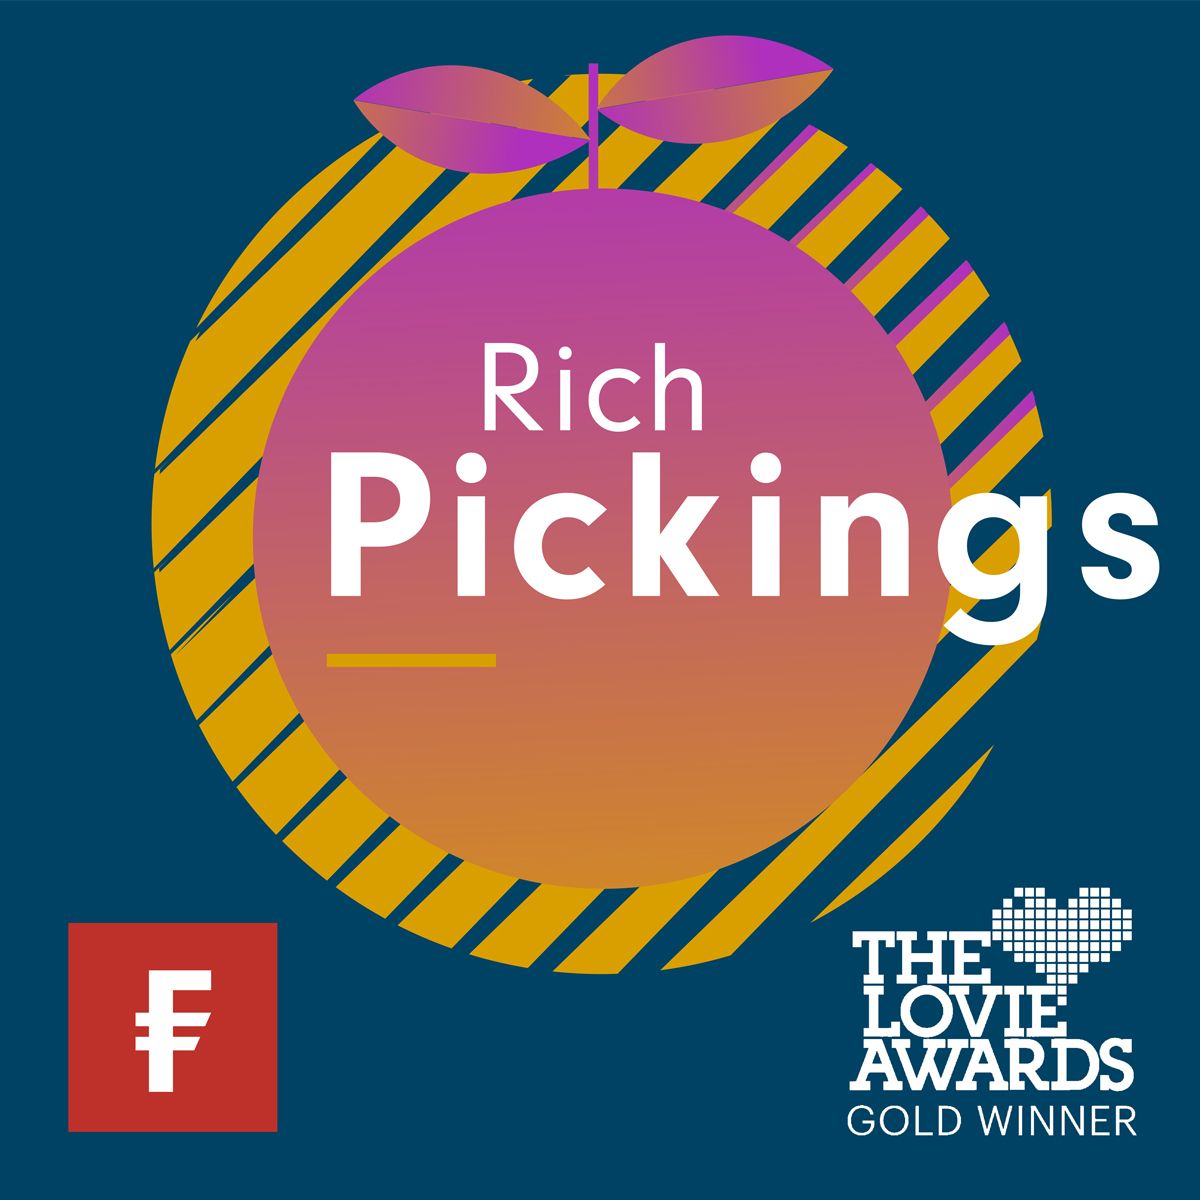 Tell us what you think about Rich Pickings